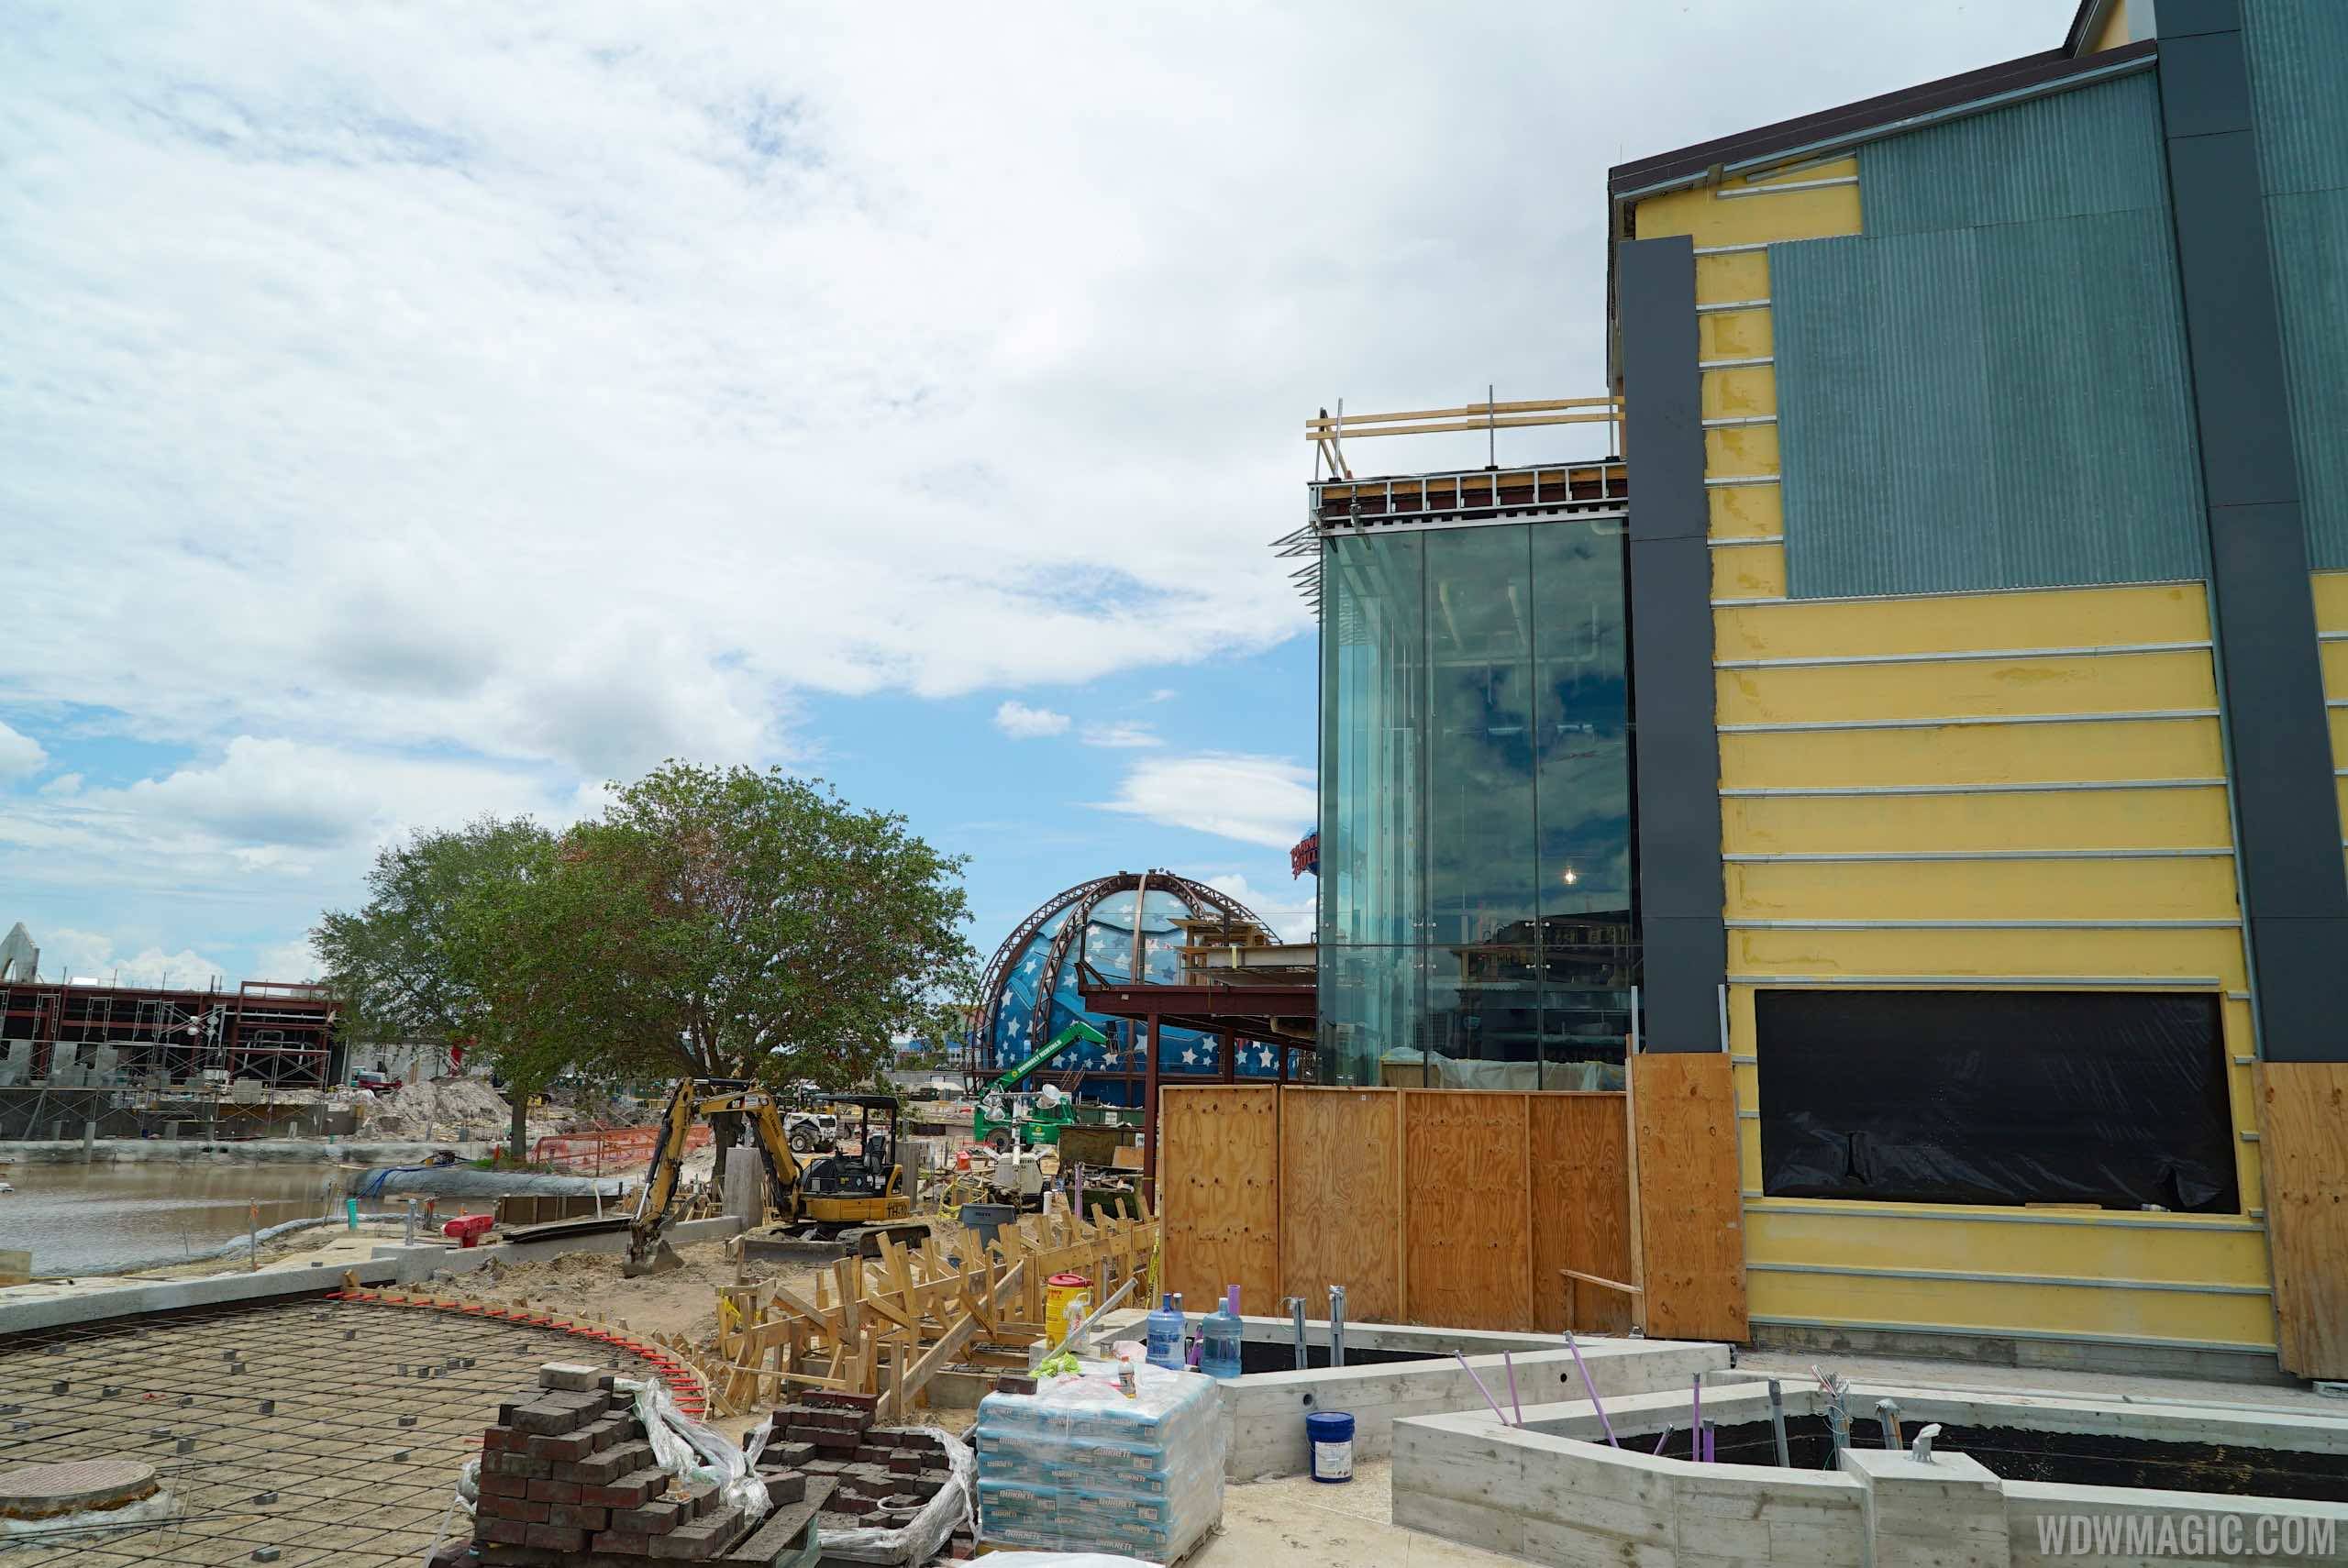 PHOTO - Latest look at Morimoto Asia construction in Disney Springs